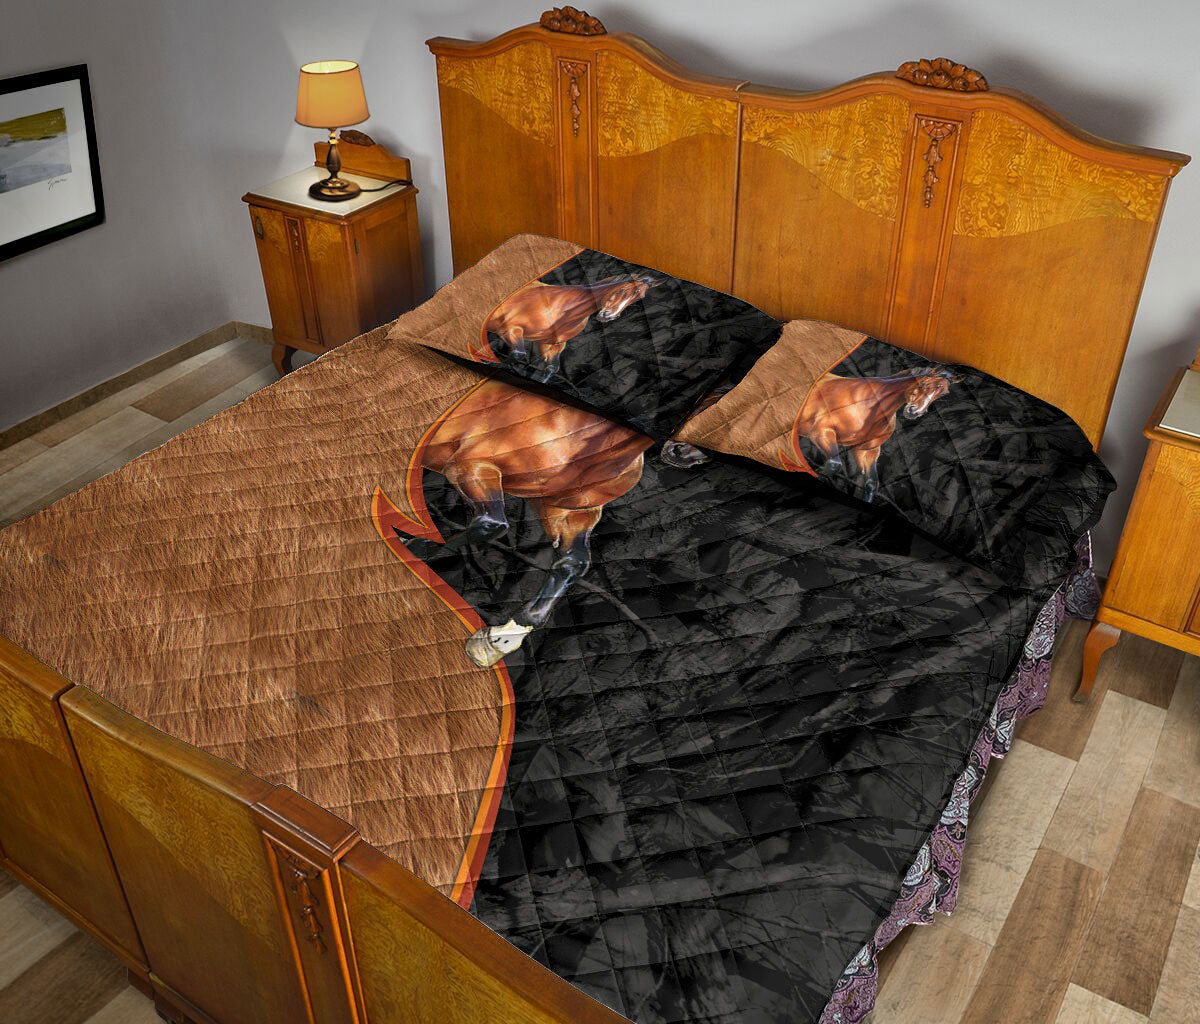 Ohaprints-Quilt-Bed-Set-Pillowcase-Wild-Horse-In-Jungle-Running-Black-&-Brown-Pattern-Gift-For-Horse-Animal-Lover-Blanket-Bedspread-Bedding-2630-Queen (80'' x 90'')